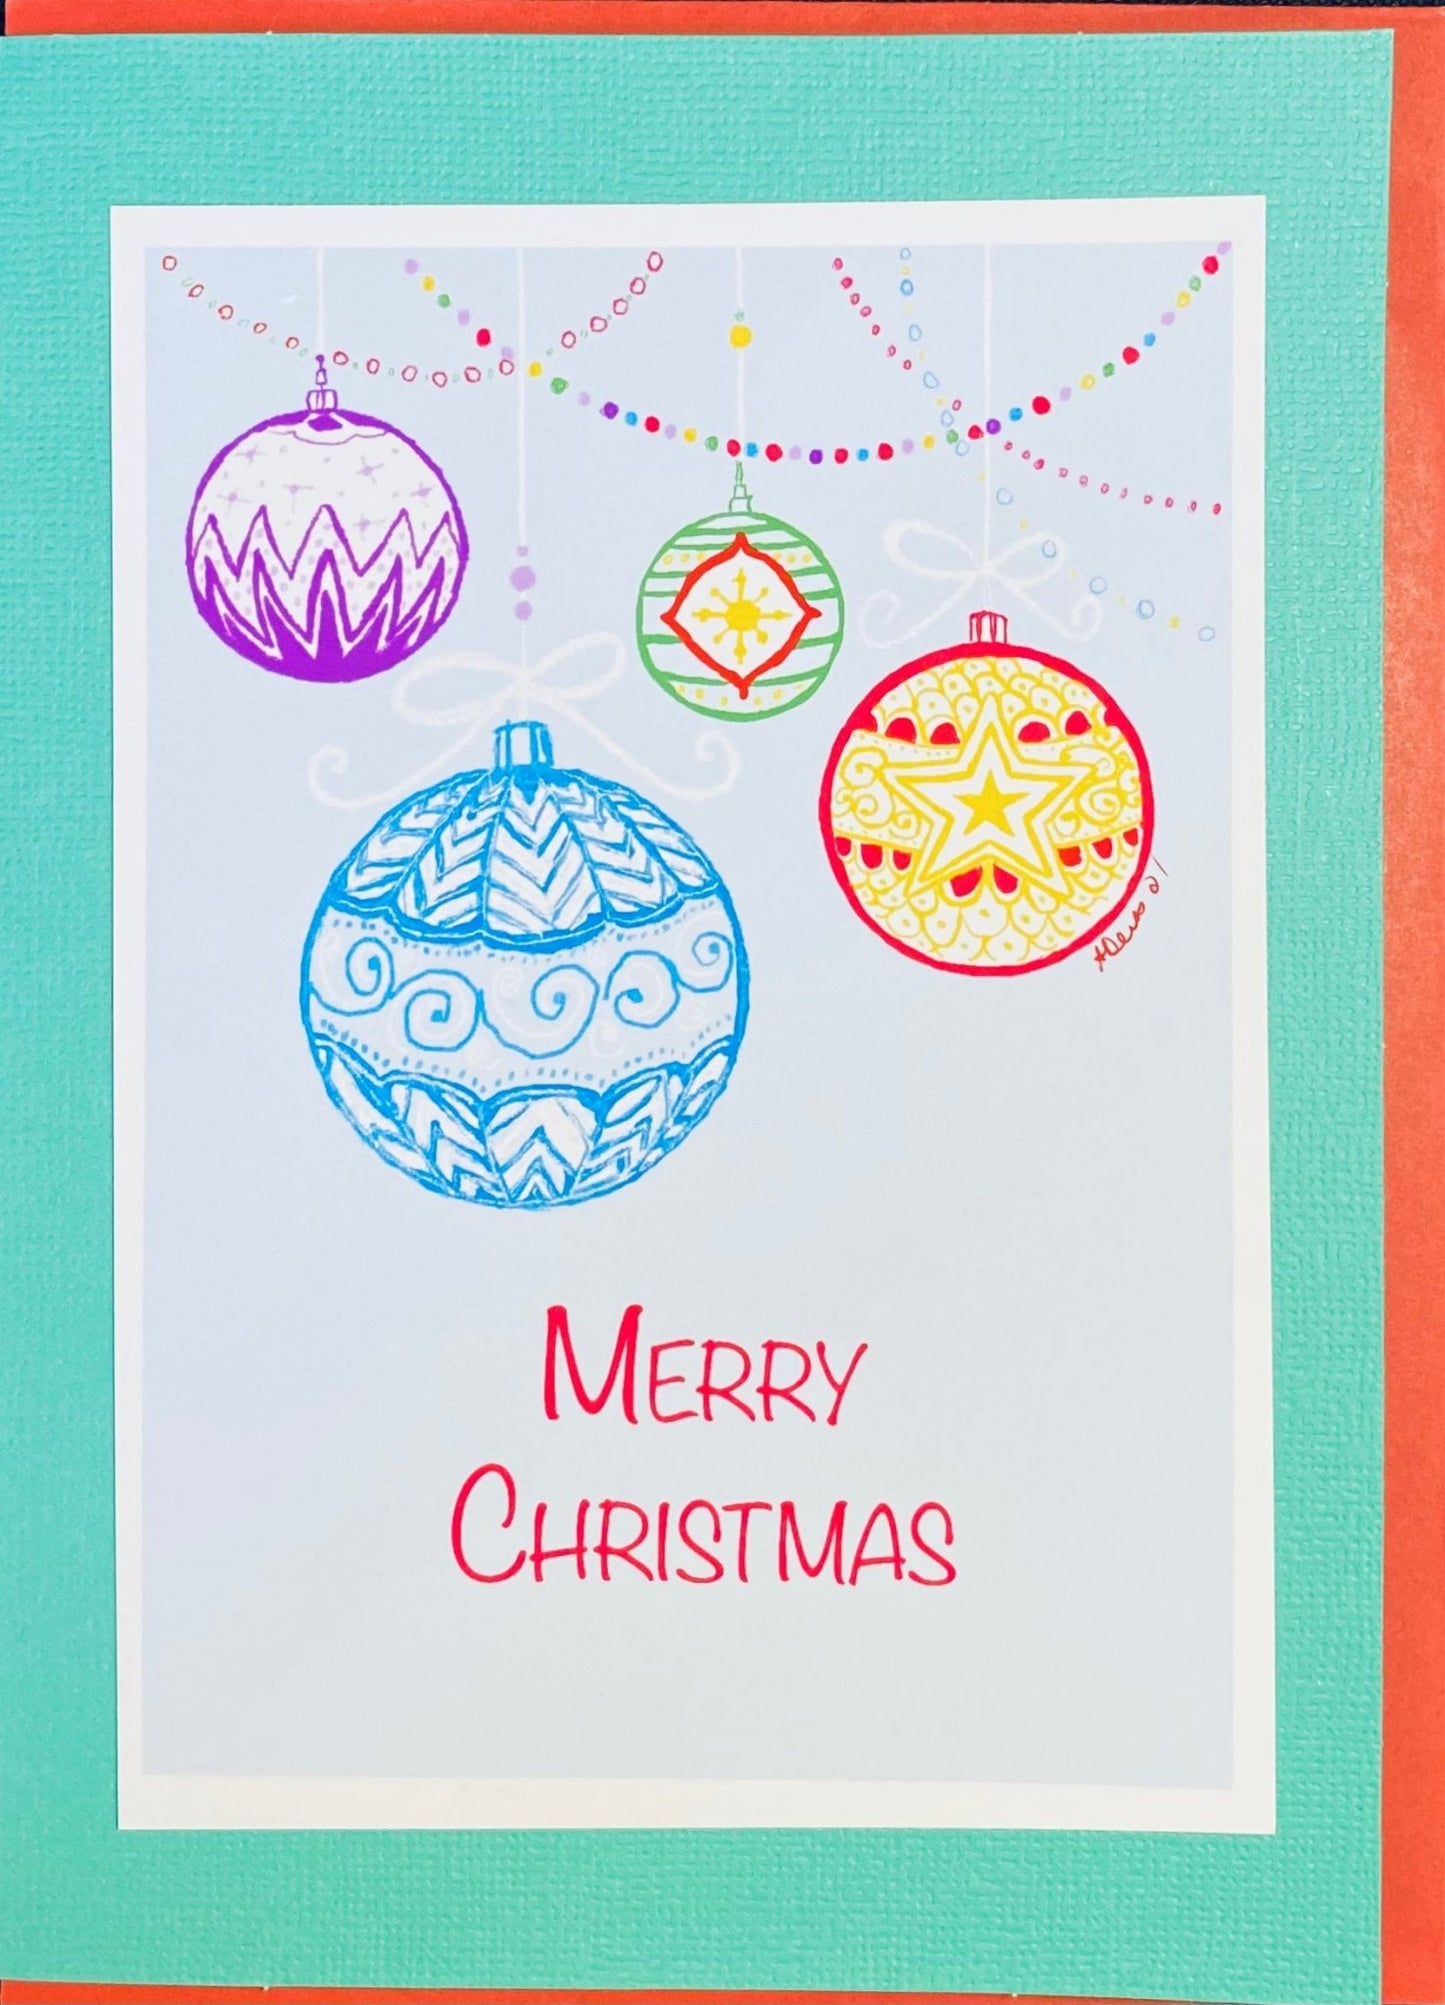 Christmas Balls Greeting card (Multiple colors available) - Blue Cava